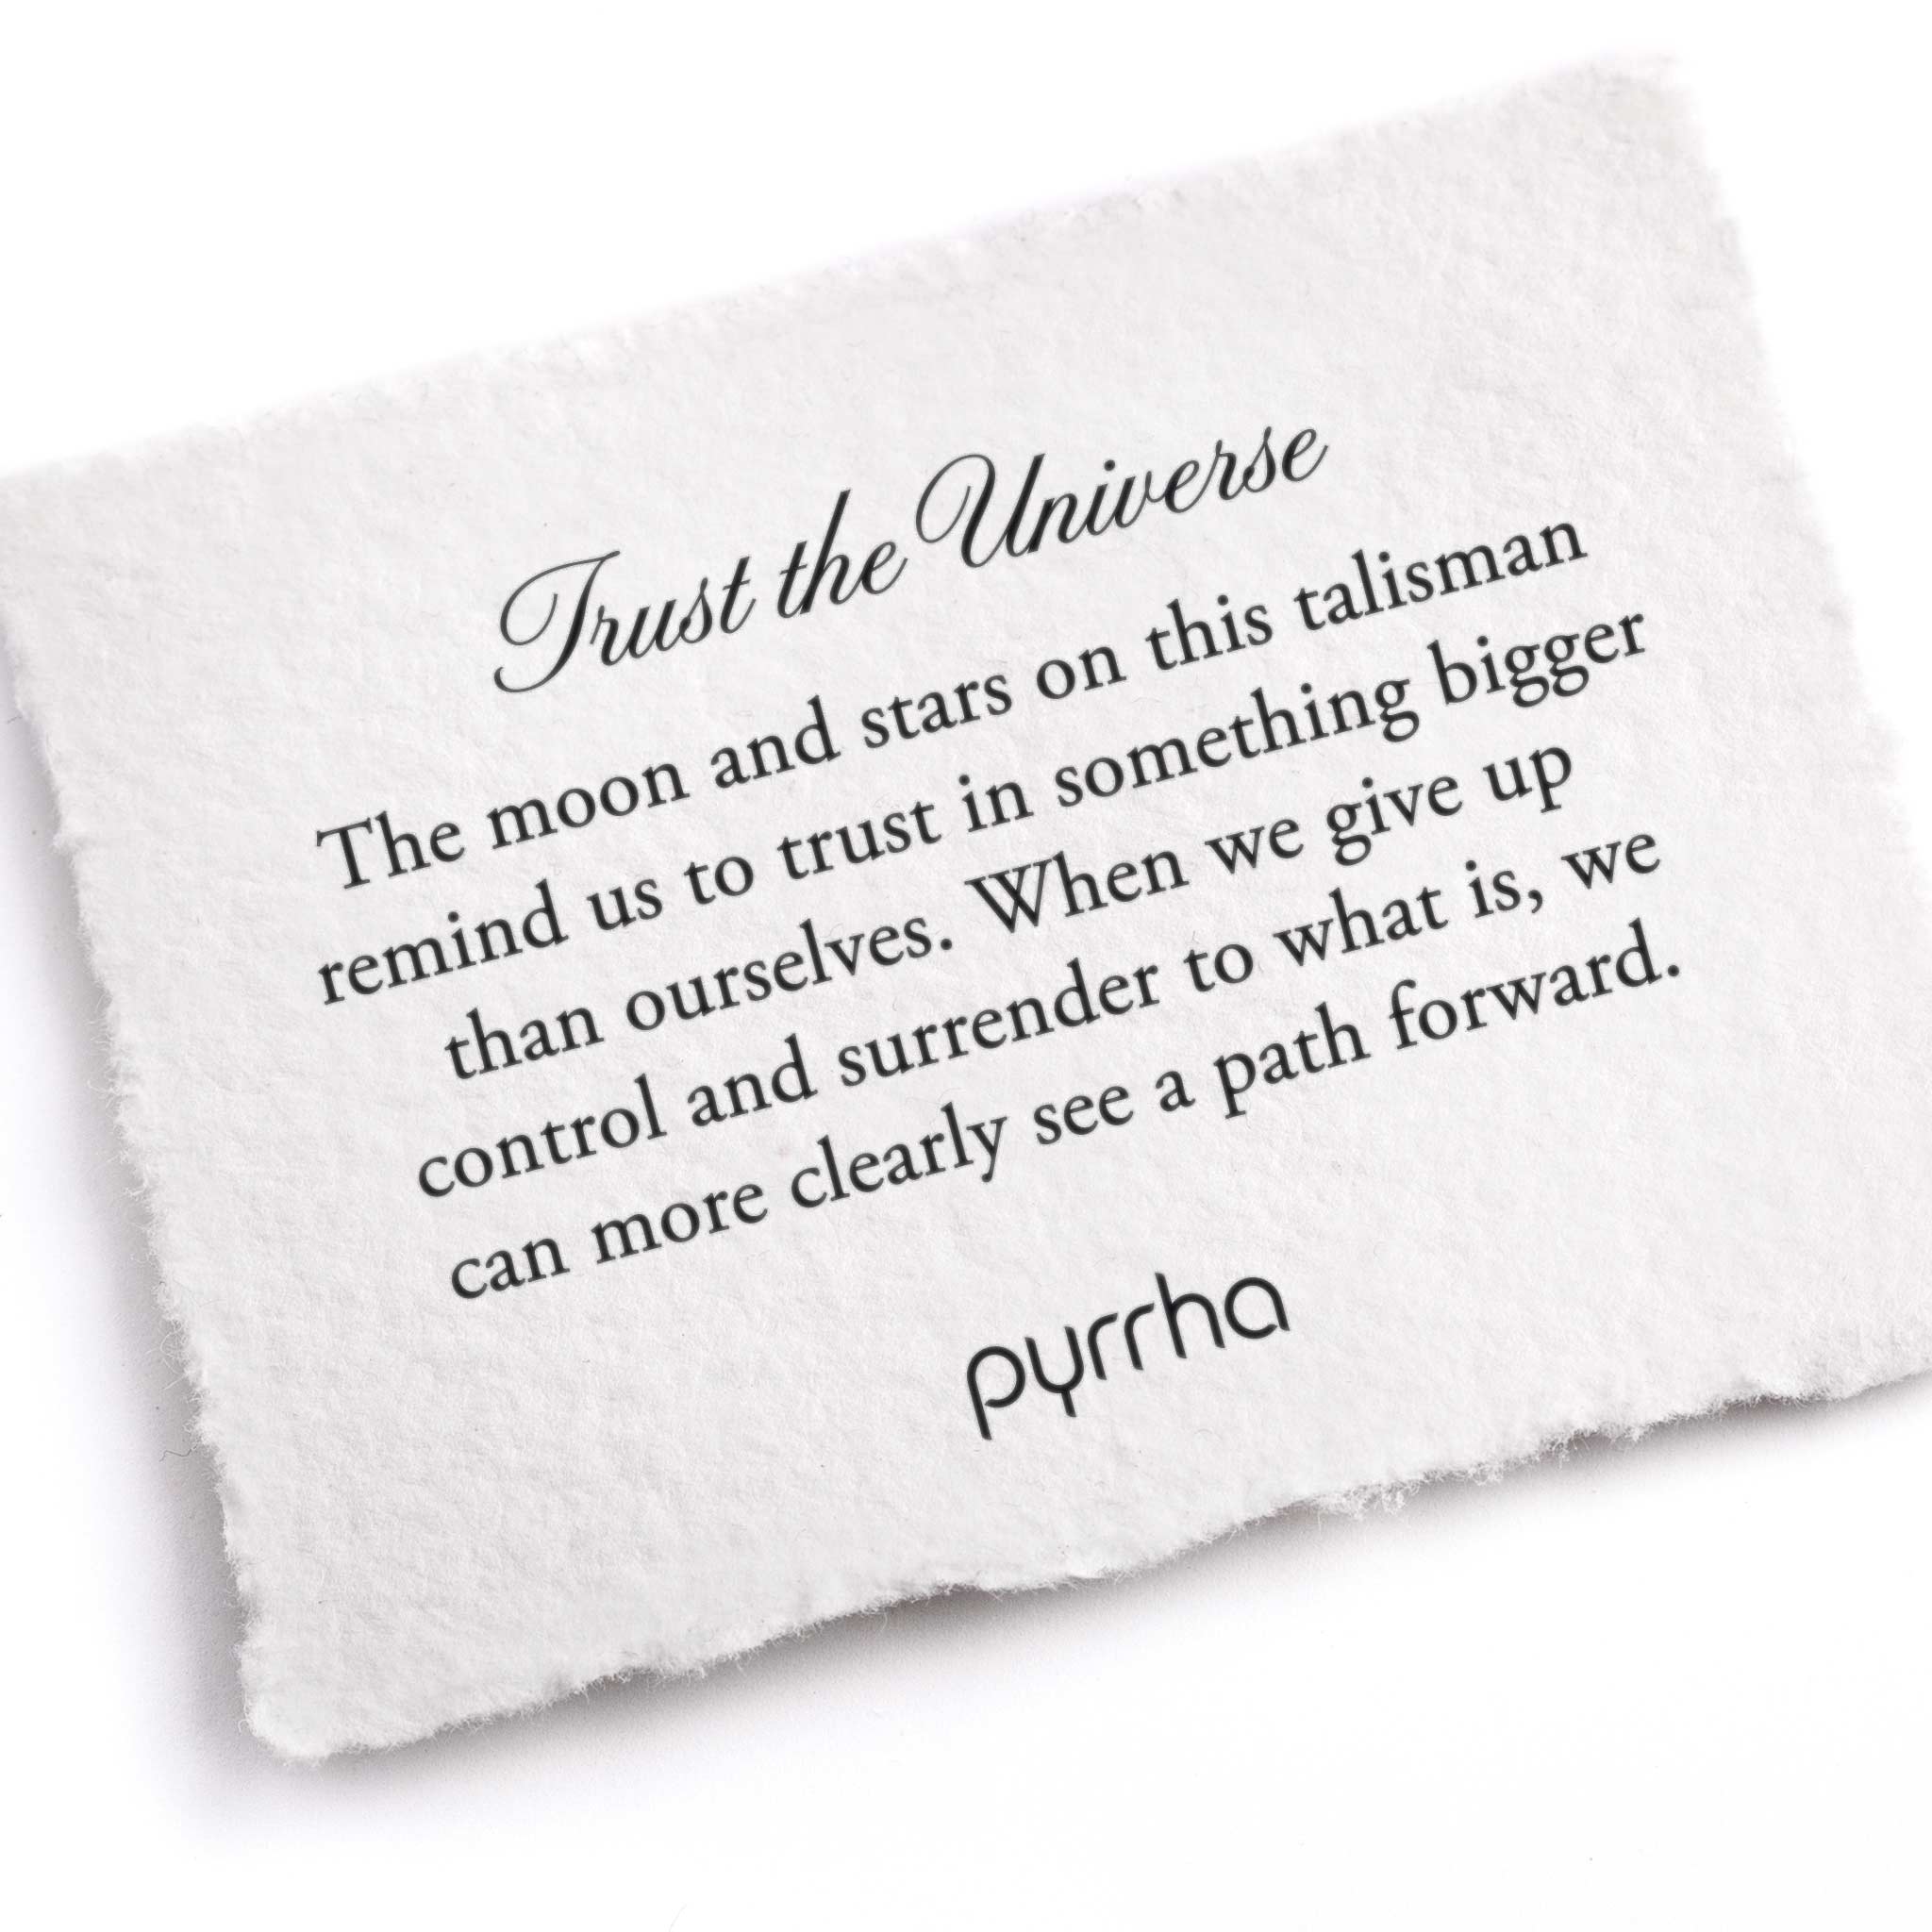 A hand-torn, letterpress printed card describing the meaning for Pyrrha's Trust the Universe Signature Talisman Necklace